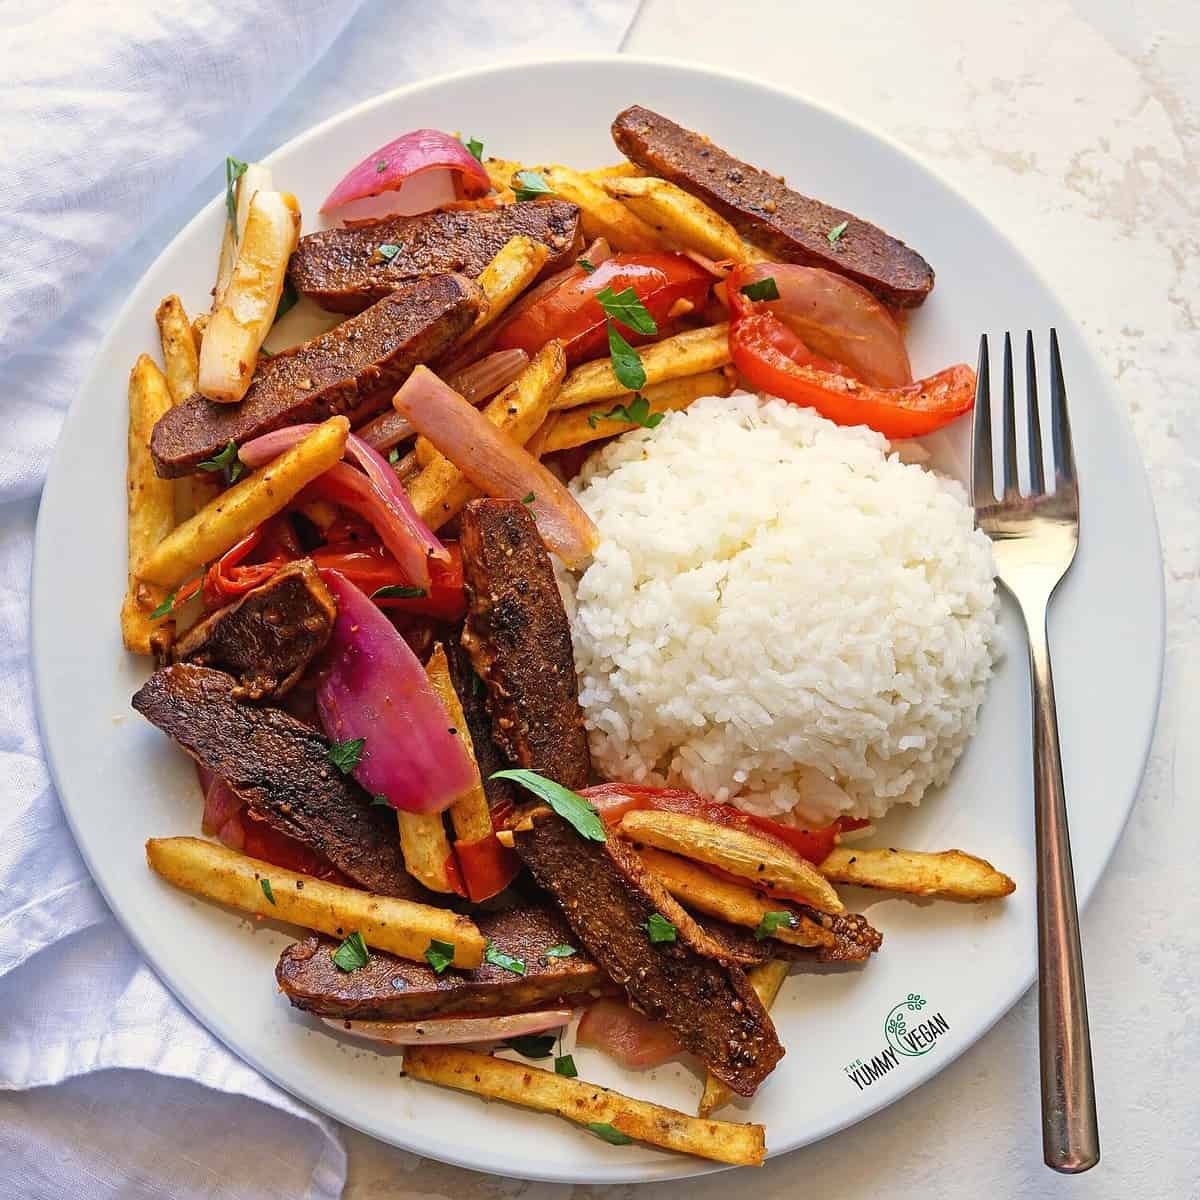  With its bold flavors and textures, this Lomo Saltado is a vegetarian dream come true.